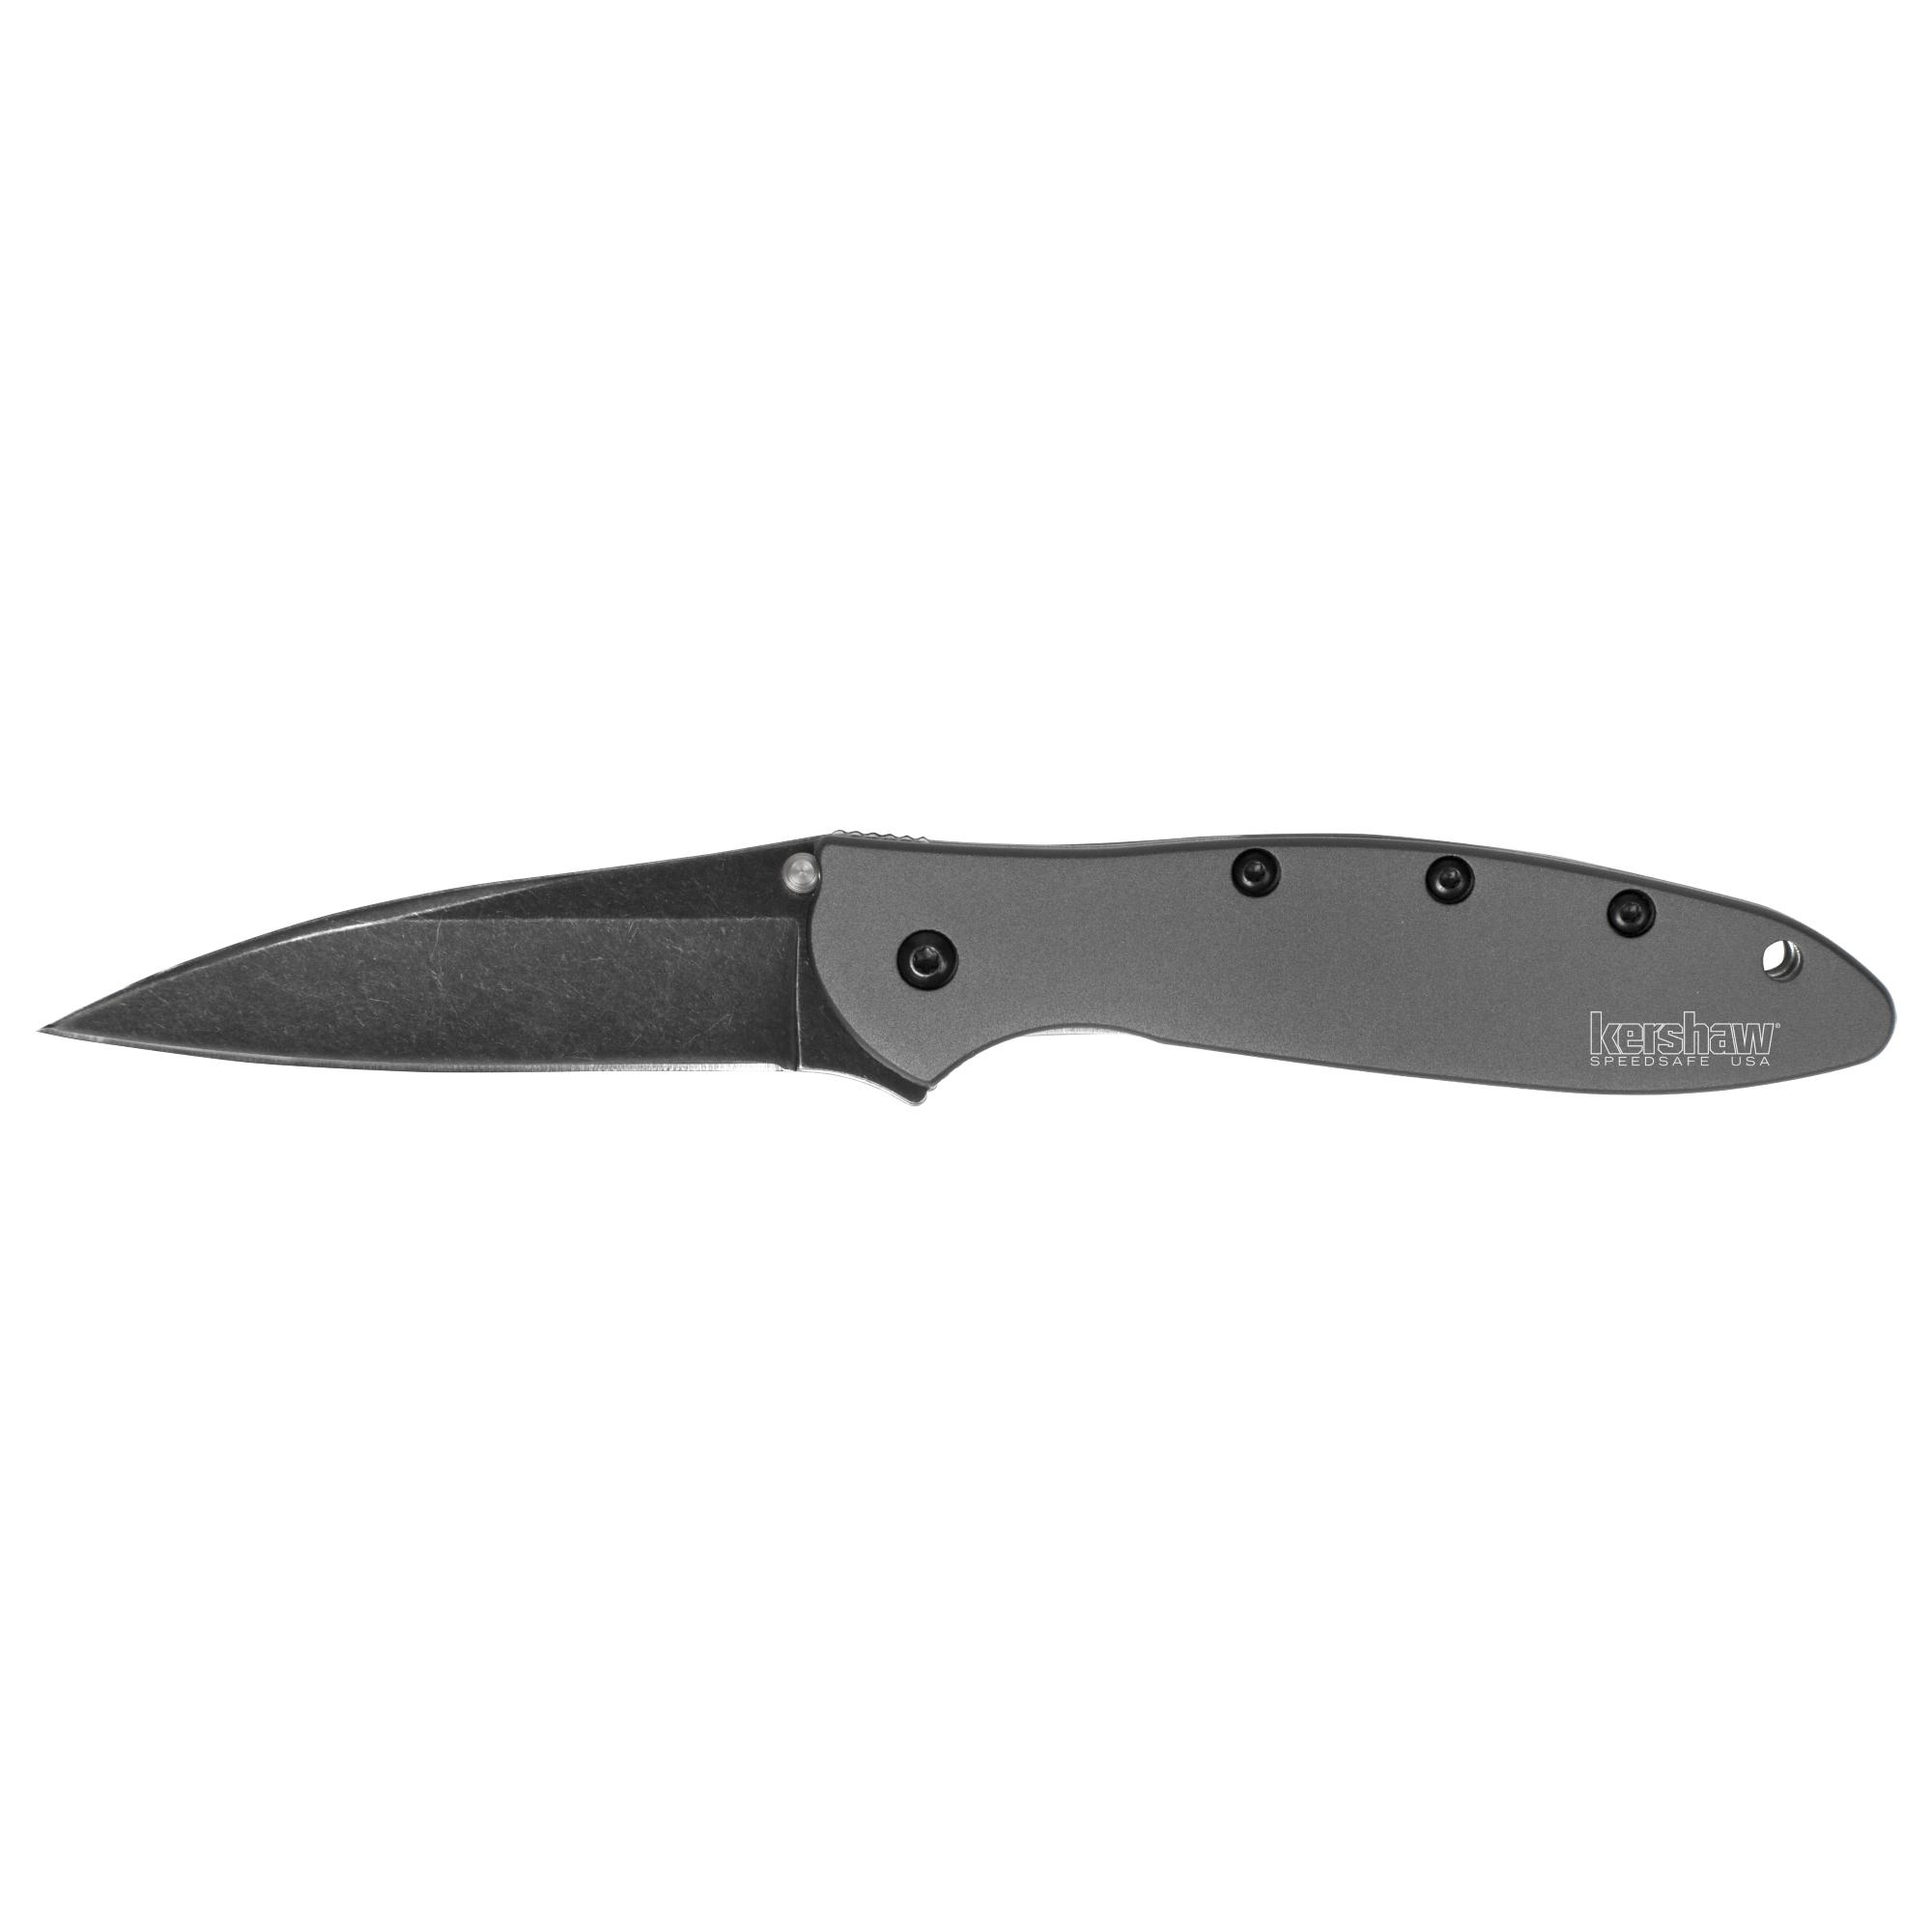 Kershaw Leek 3in Gray Pocket Knife with Black Blade for $29.84